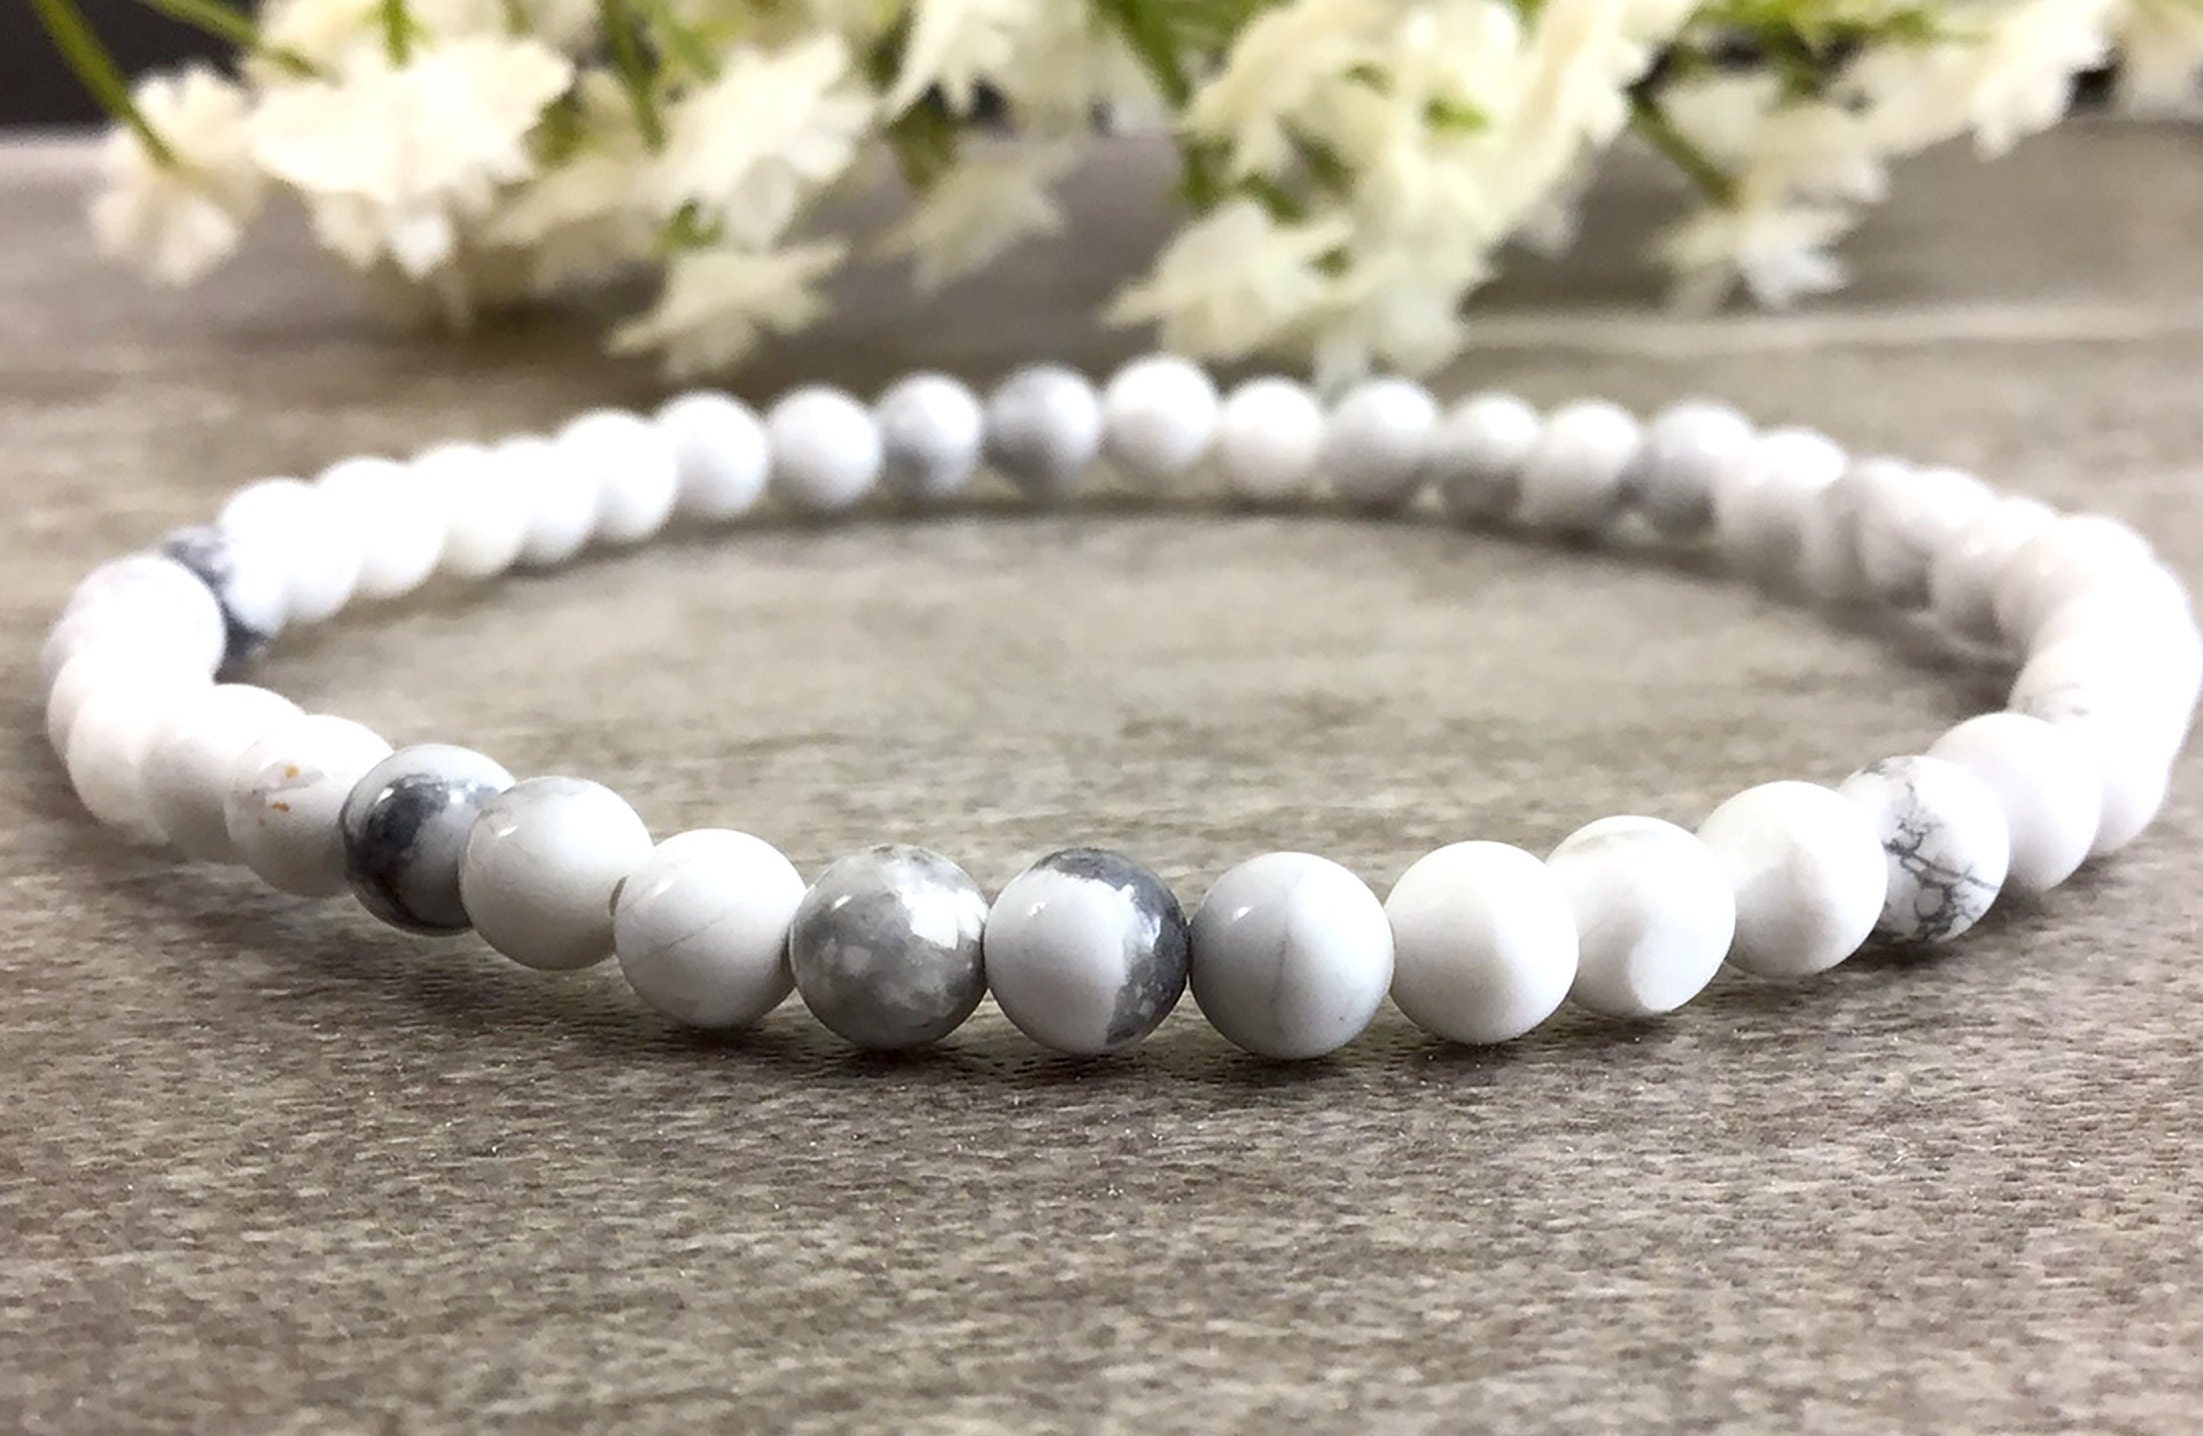 White Marble Howlite Stone Bead Bracelet with Bronze Spacers -  10mm-Wholesale